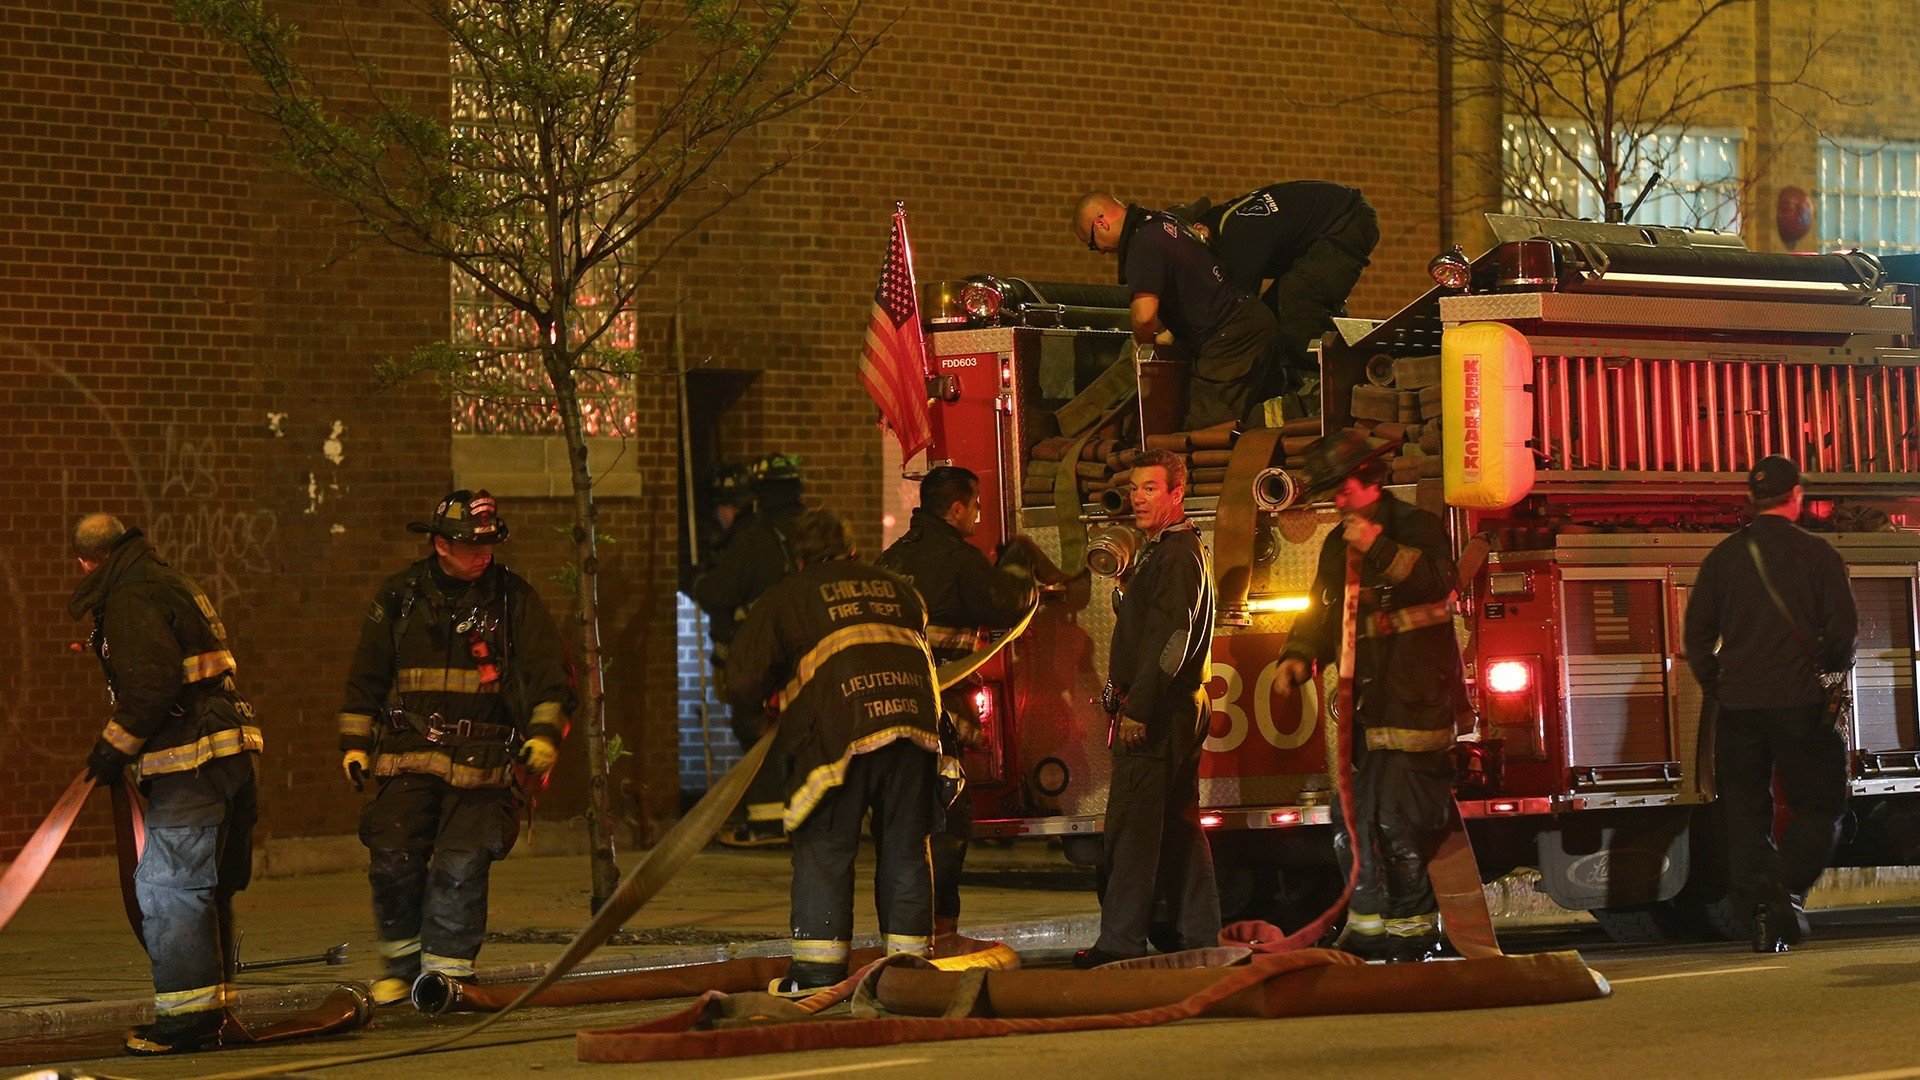 Chicago Fire Department Accepting Applications For Fire Department